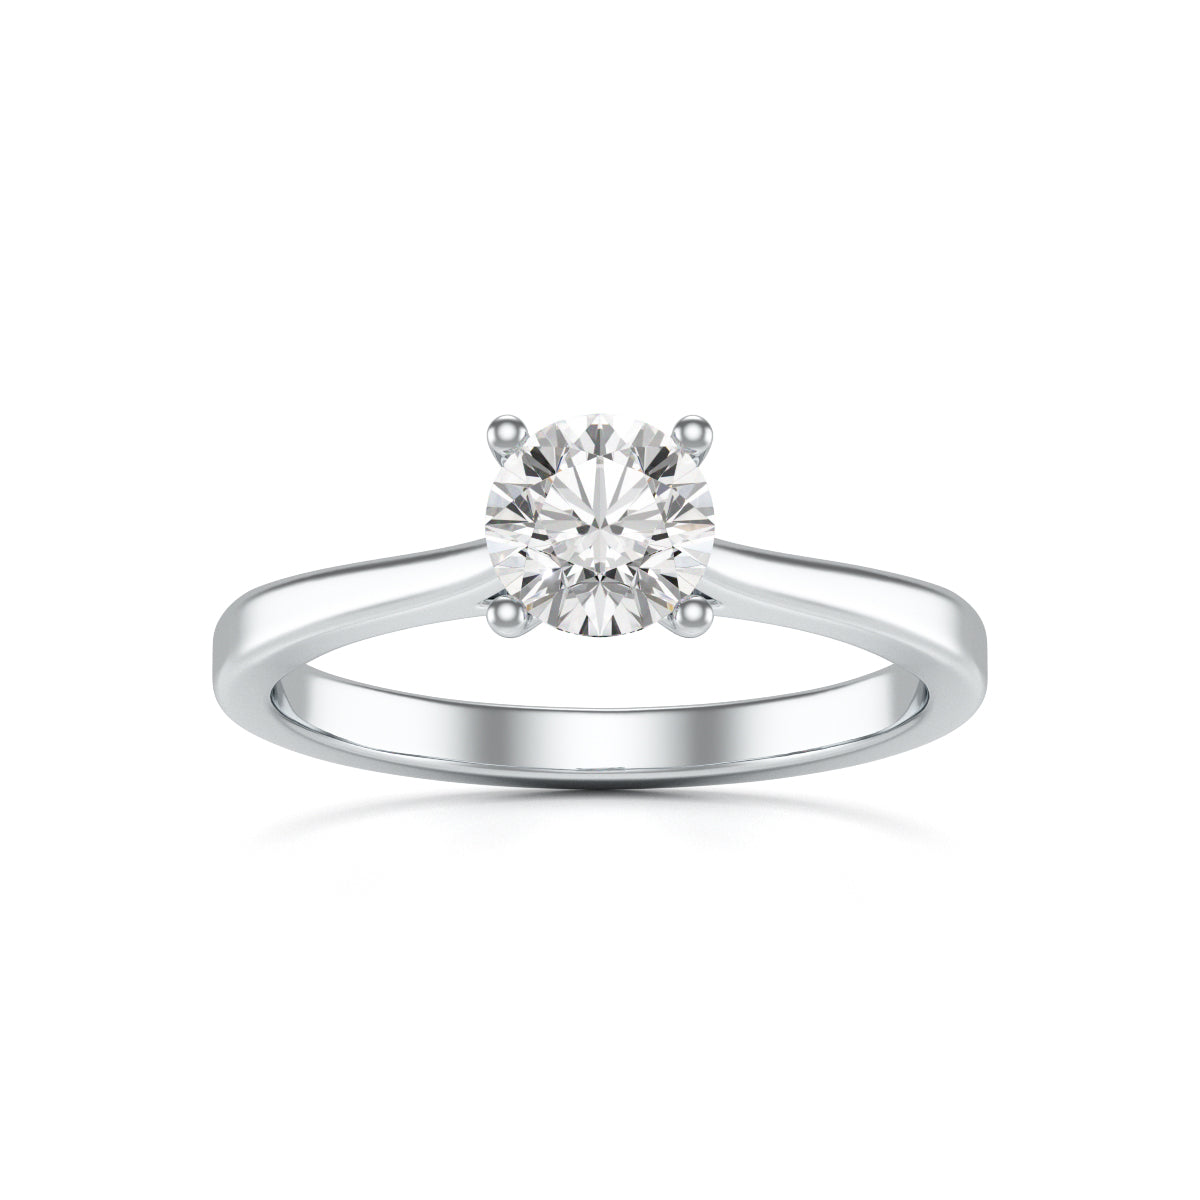 Diamond Engagement Ring- Round Four Claw Tapered Shank Plain